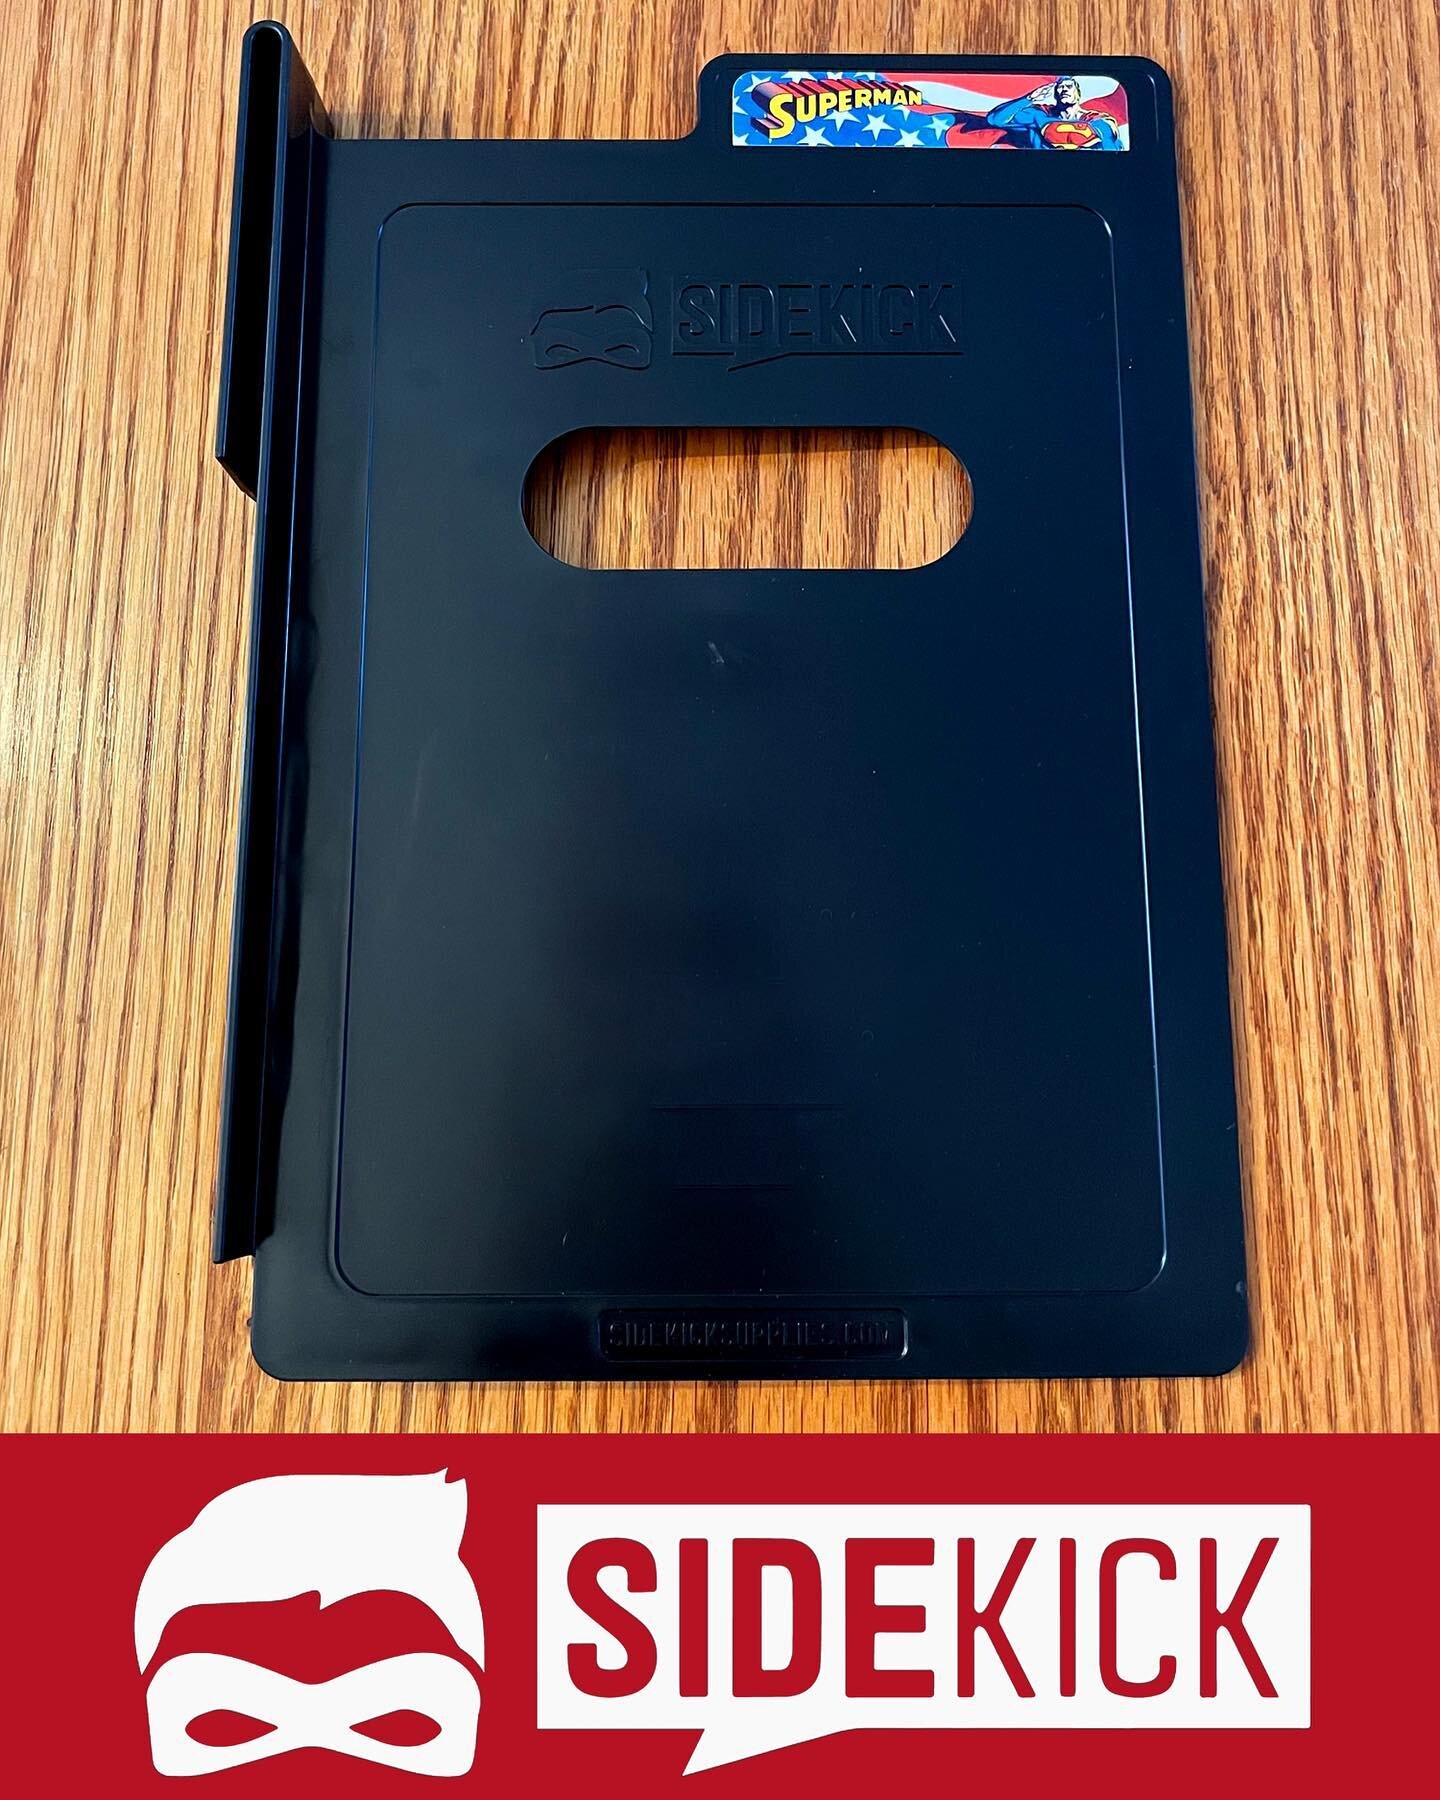 Do yourself a favor and check out @sidekick.comicsupplies! If you have comic boxes that aren&rsquo;t yet full with books constantly tipping over, then SideKicks is the solution.

These rock-solid boards are made with a high-quality plastic. The hook 